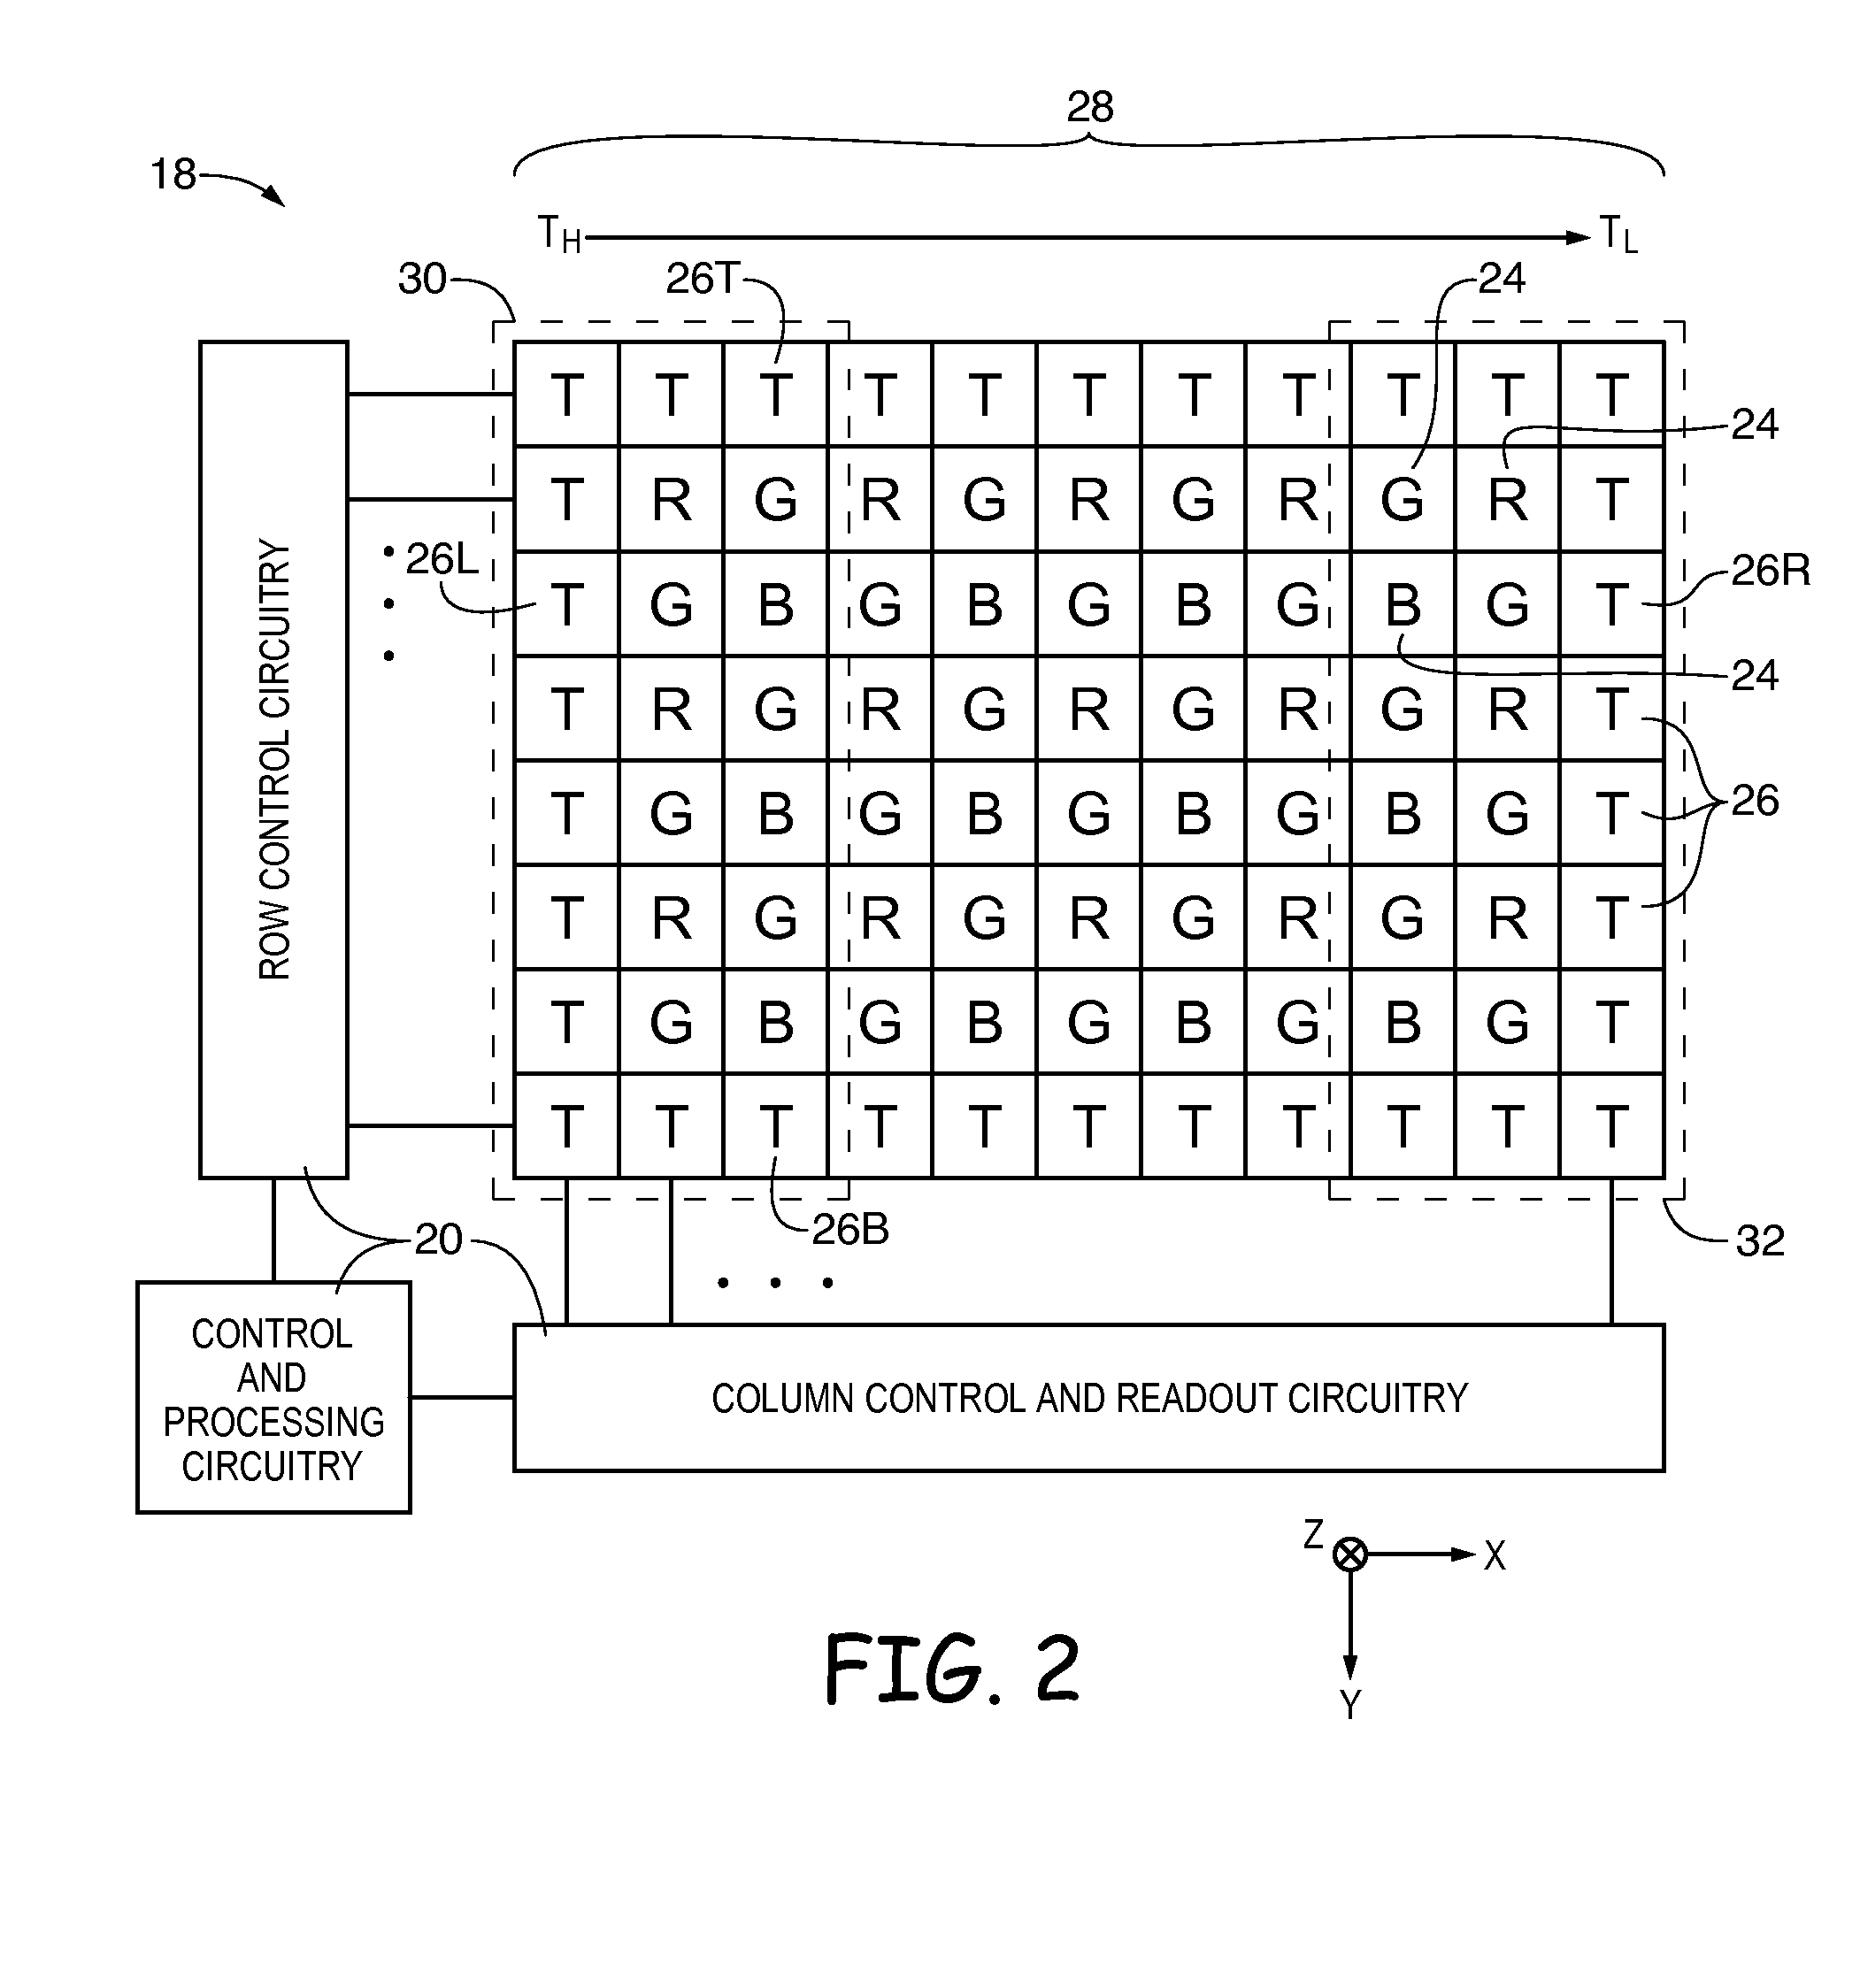 Systems and methods for pixel-level dark current compensation in image sensors